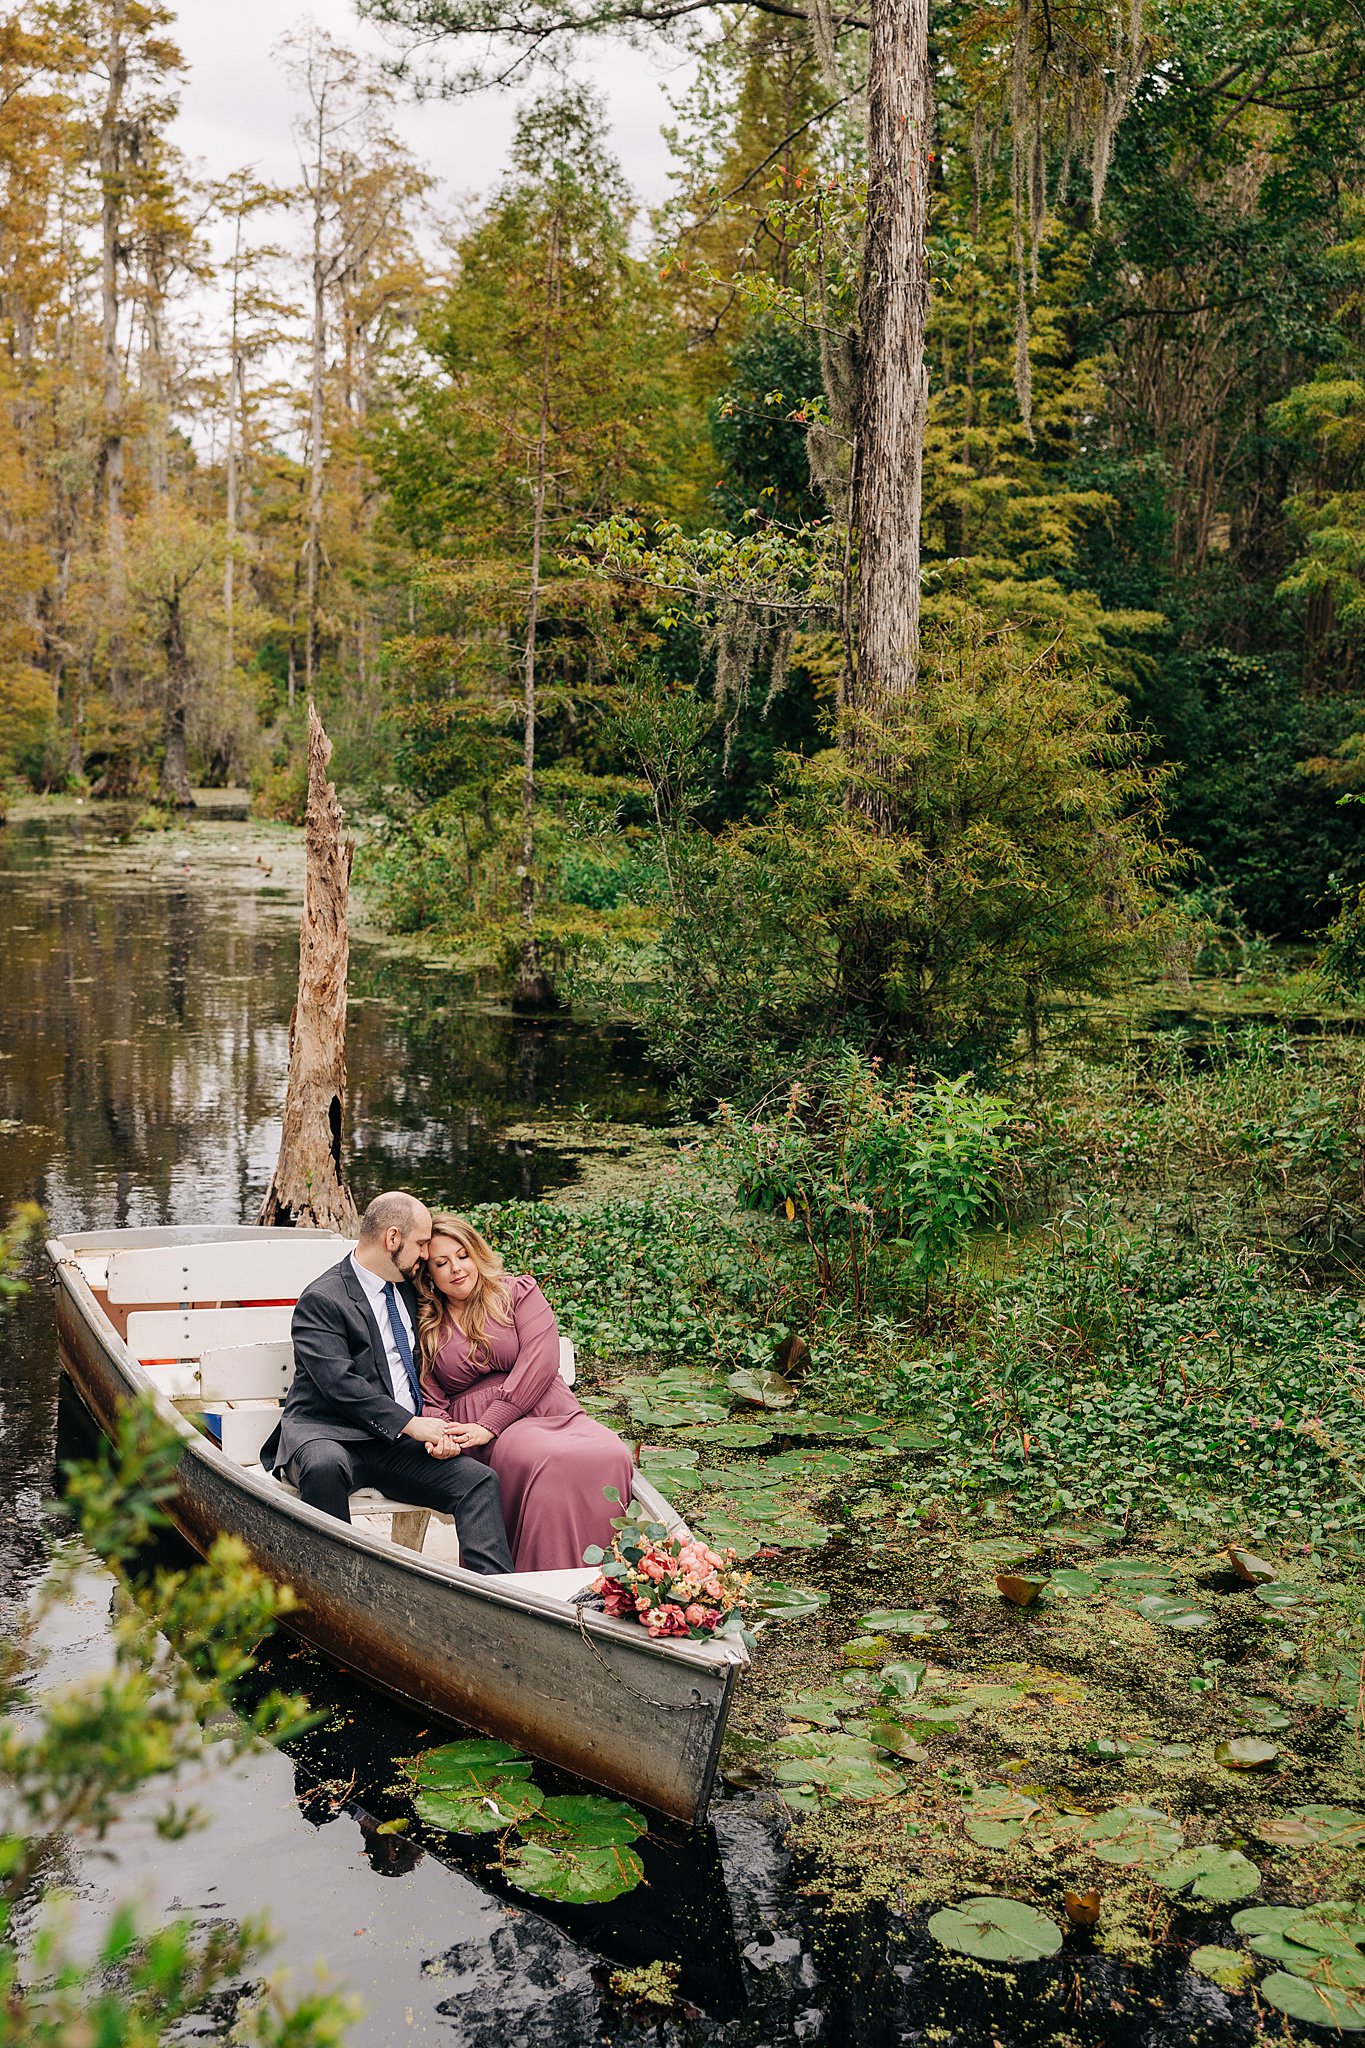 A peek at a couple snuggling while floating in a boat in a swamp